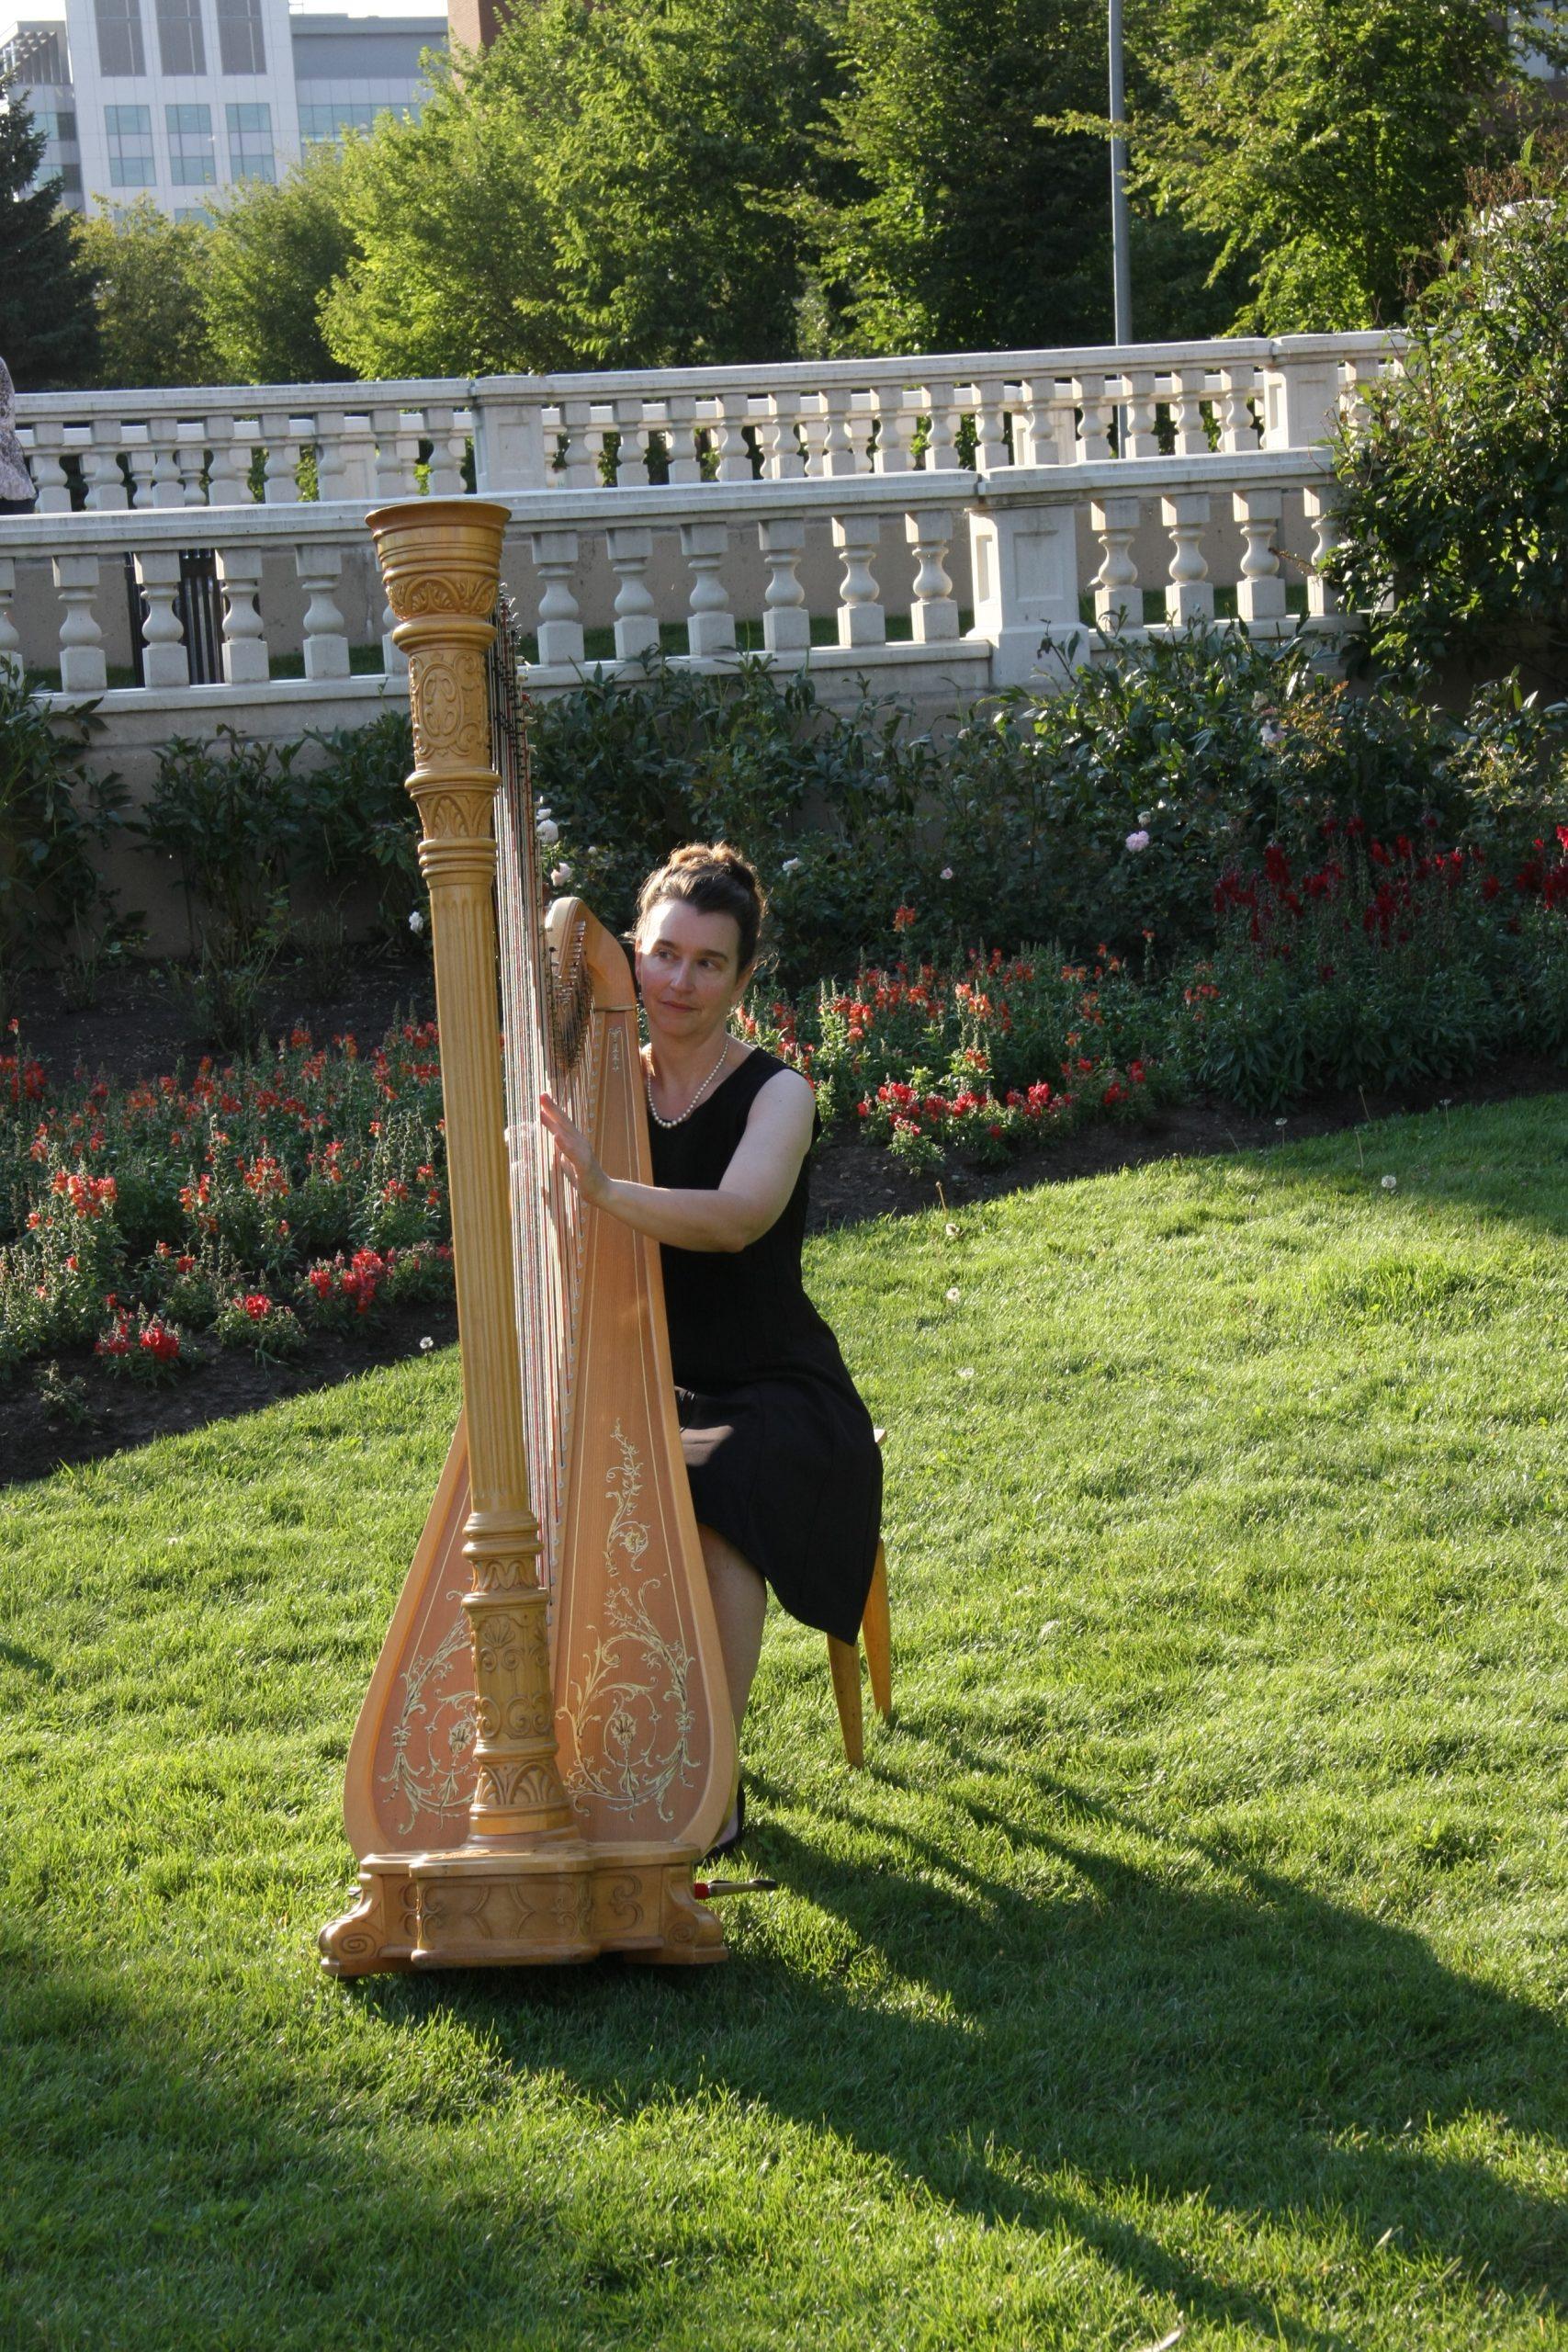 Calgary Harpist, Adrienne playing classical harp outside in Calgary